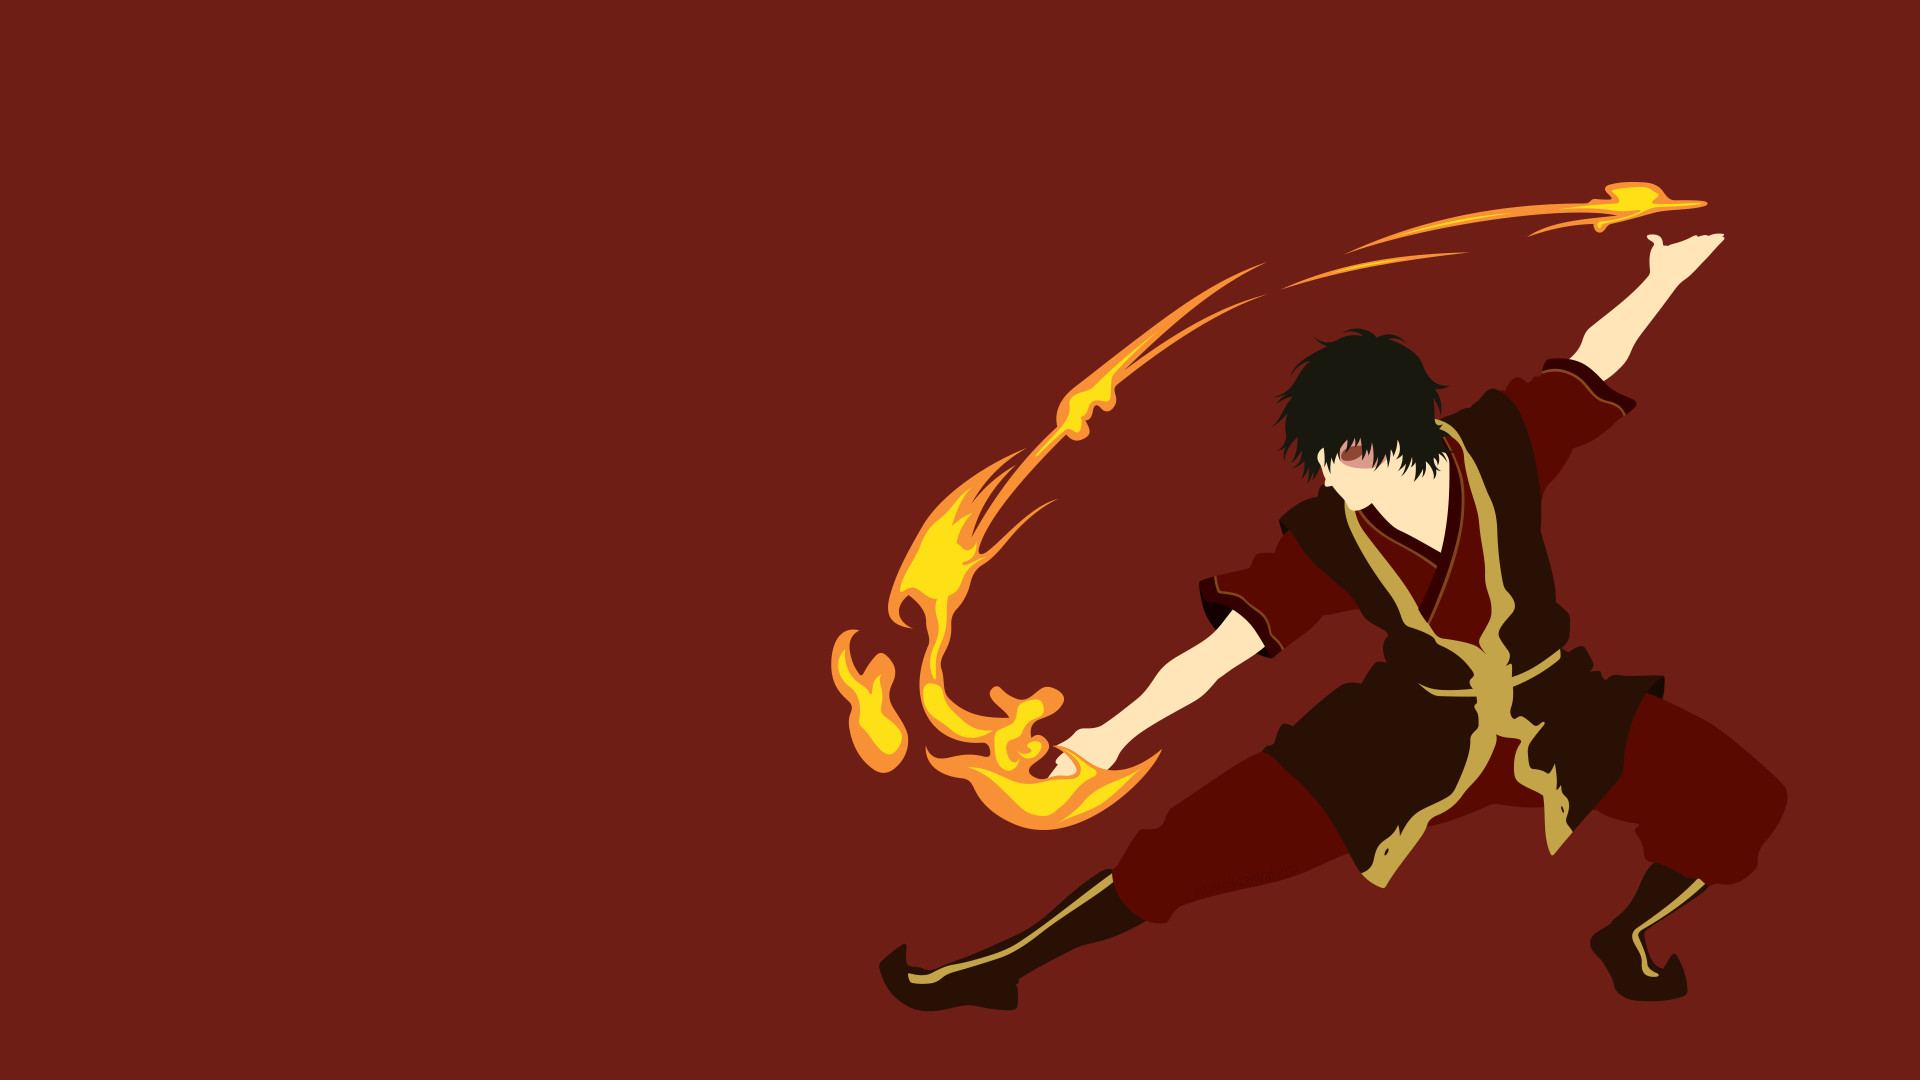 1 4k Ultra Hd Zuko Avatar Wallpapers Background Images Wallpaper Abyss 1920x1080